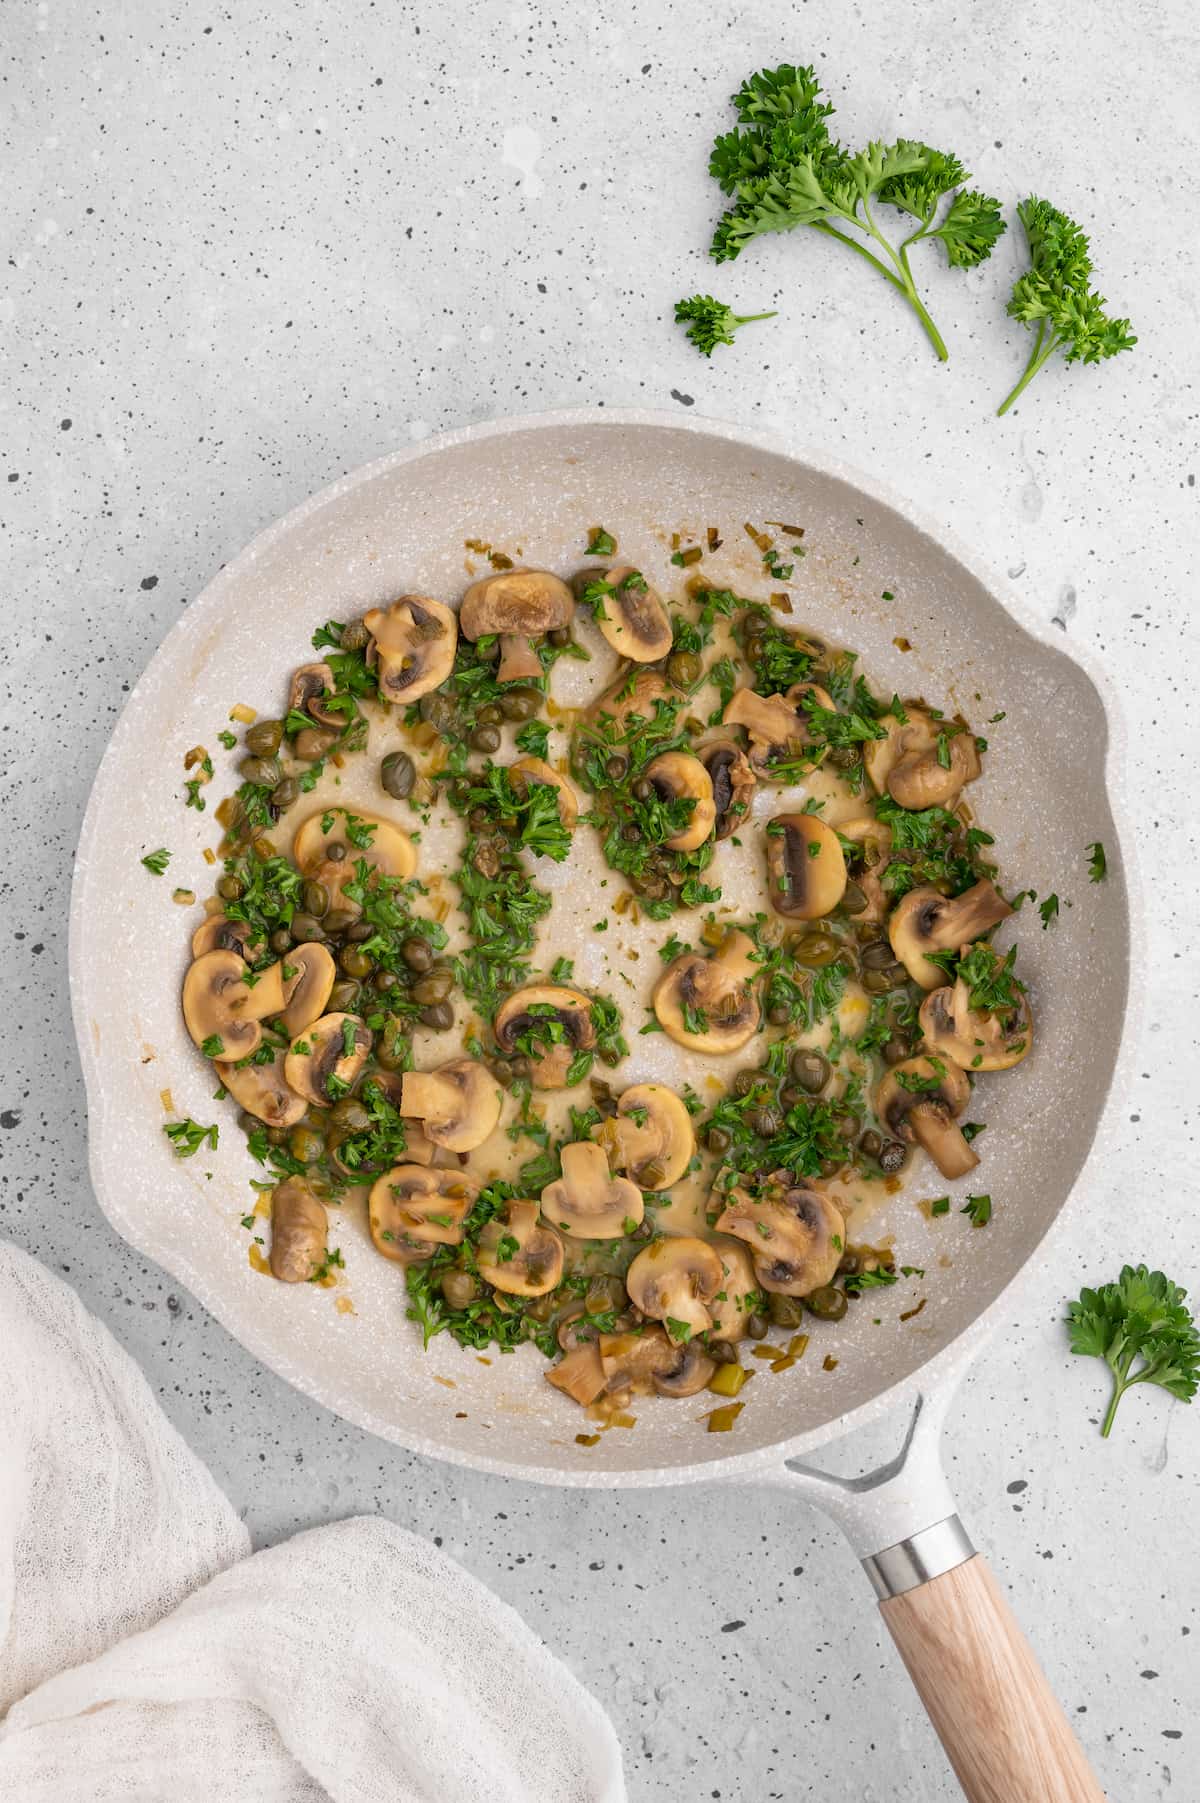 The piccata sauce with mushrooms, scallions, capers, lemon juice and wine.